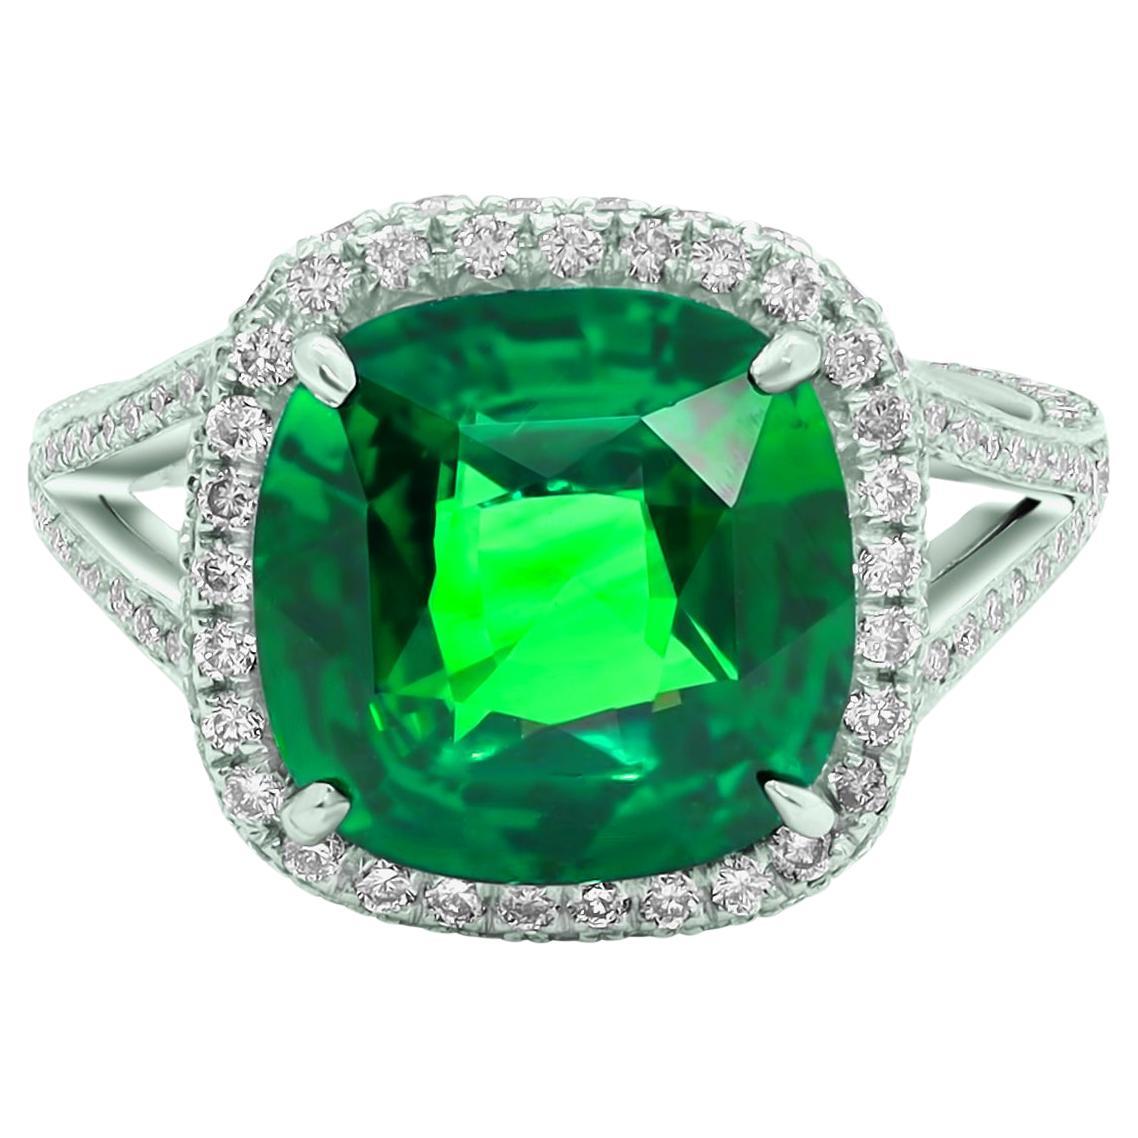 Diana M. 18 kt white gold emerald diamond ring featuring a 6.63 ct  For Sale